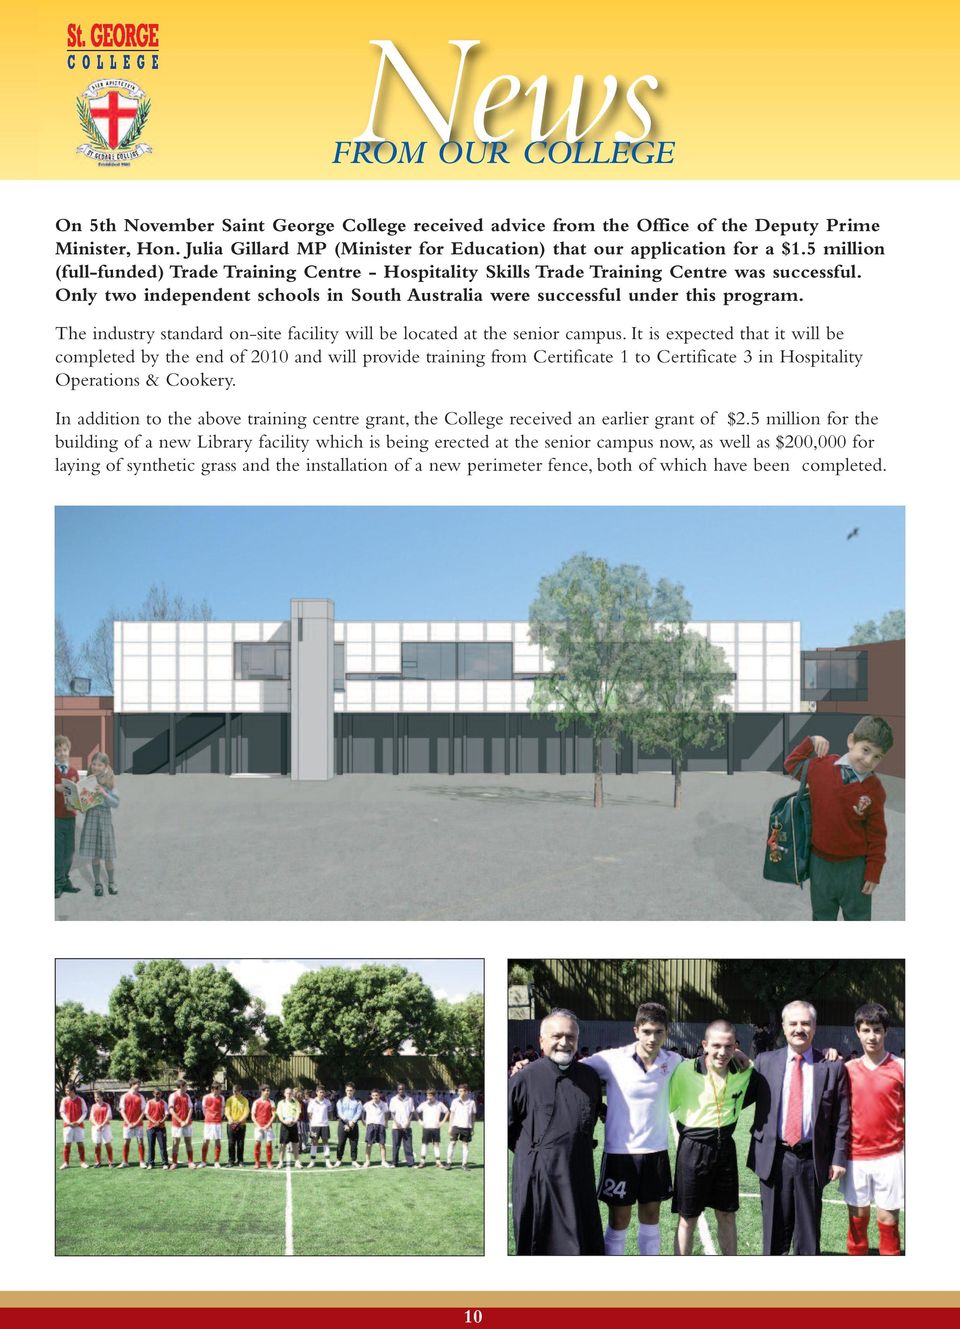 Only two independent schools in South Australia were successful under this program. The industry standard on-site facility will be located at the senior campus.